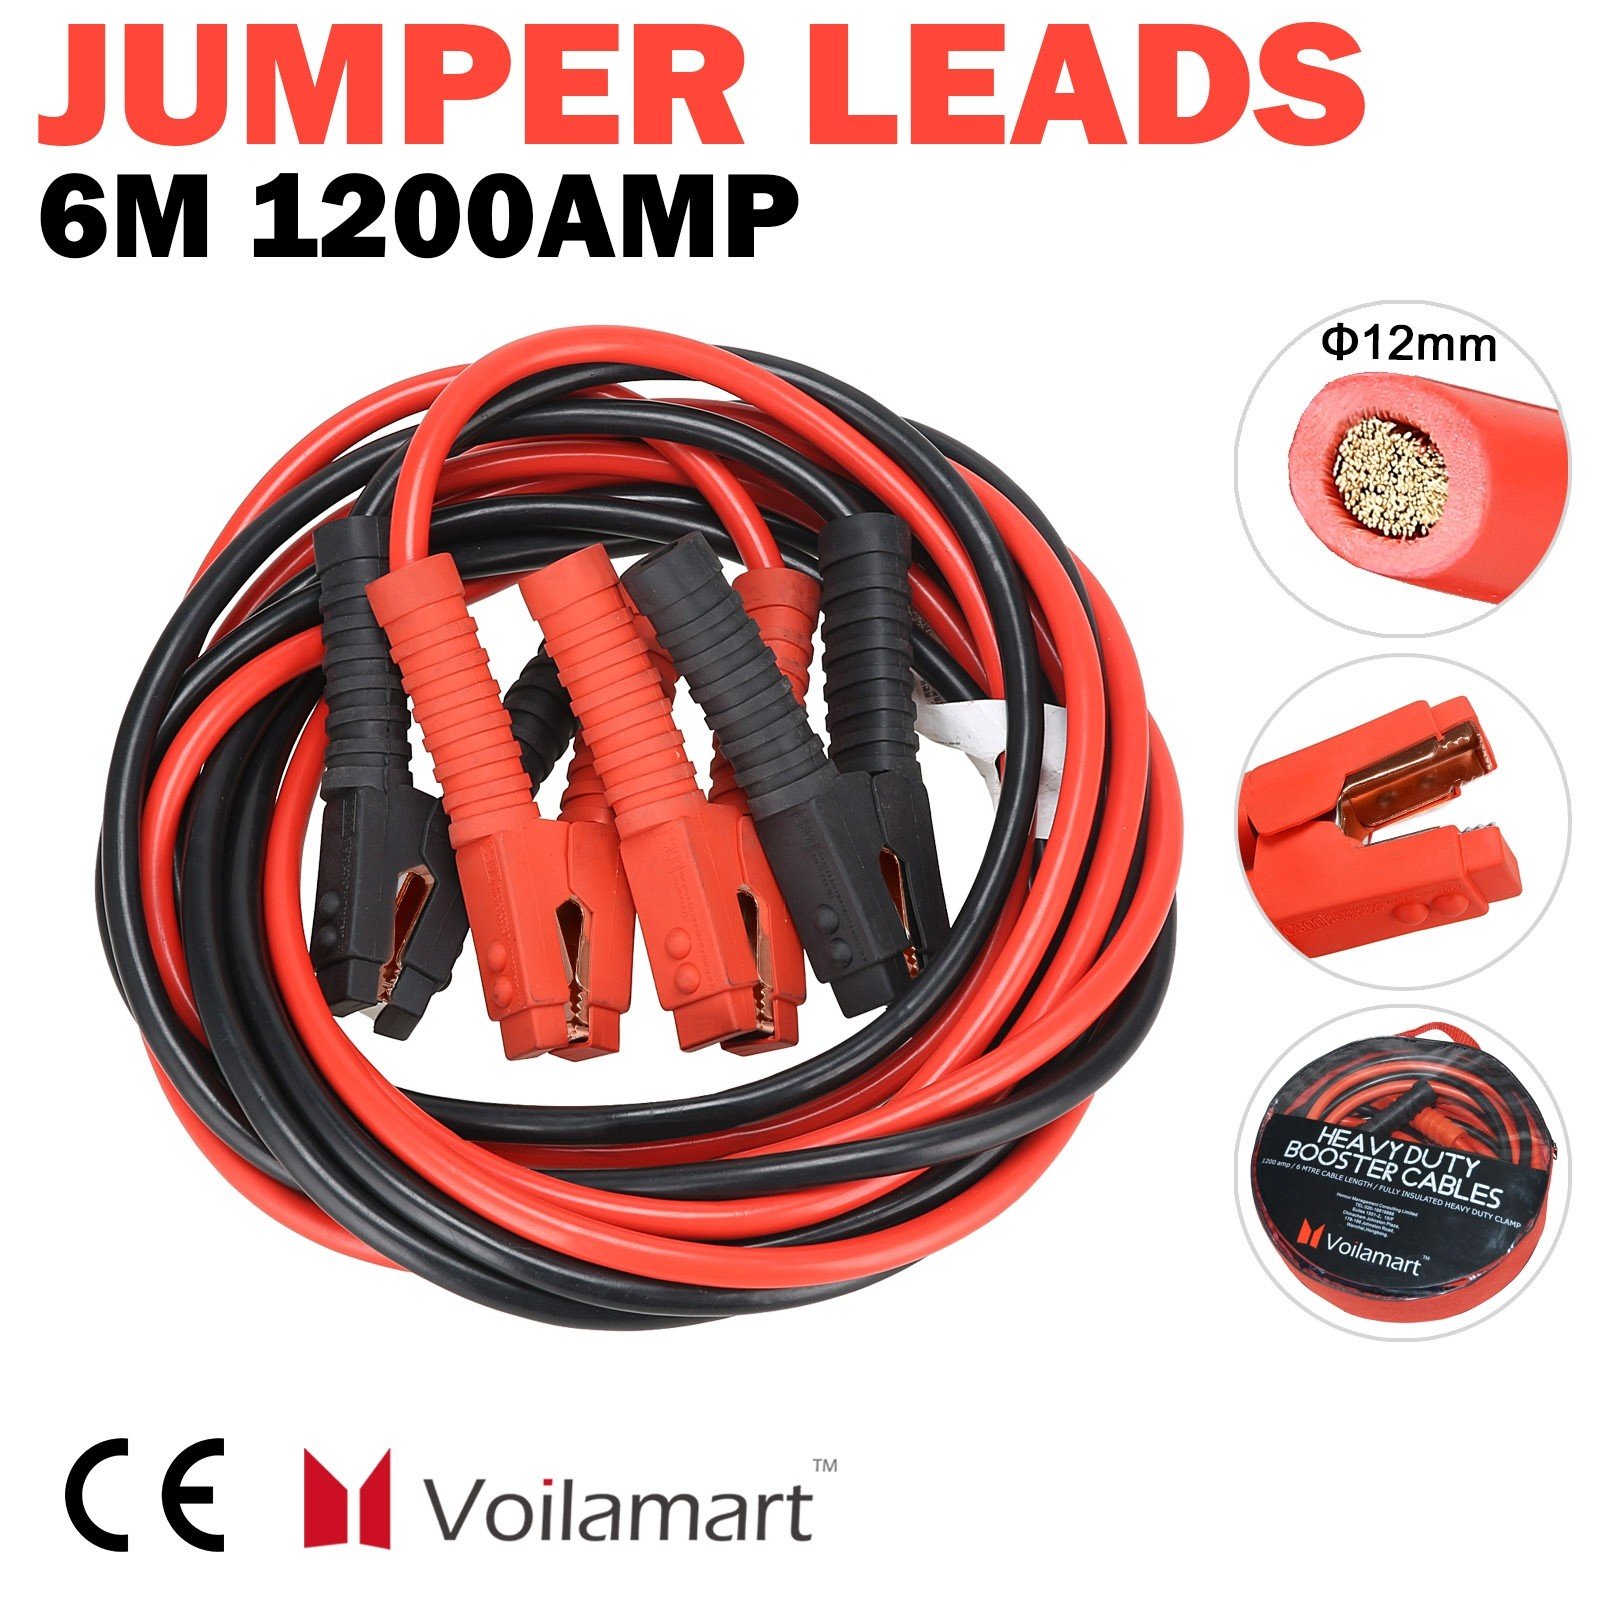 Heavy Duty for Car Van Truck Voilamart Auto Jumper Cables 1 Gauge 1200AMP 20Ft w/Carry Bag Commercial Grade Automotive Booster Cables Instruction Slip with 5M Recovery Tow Rope and Pair of Gloves 